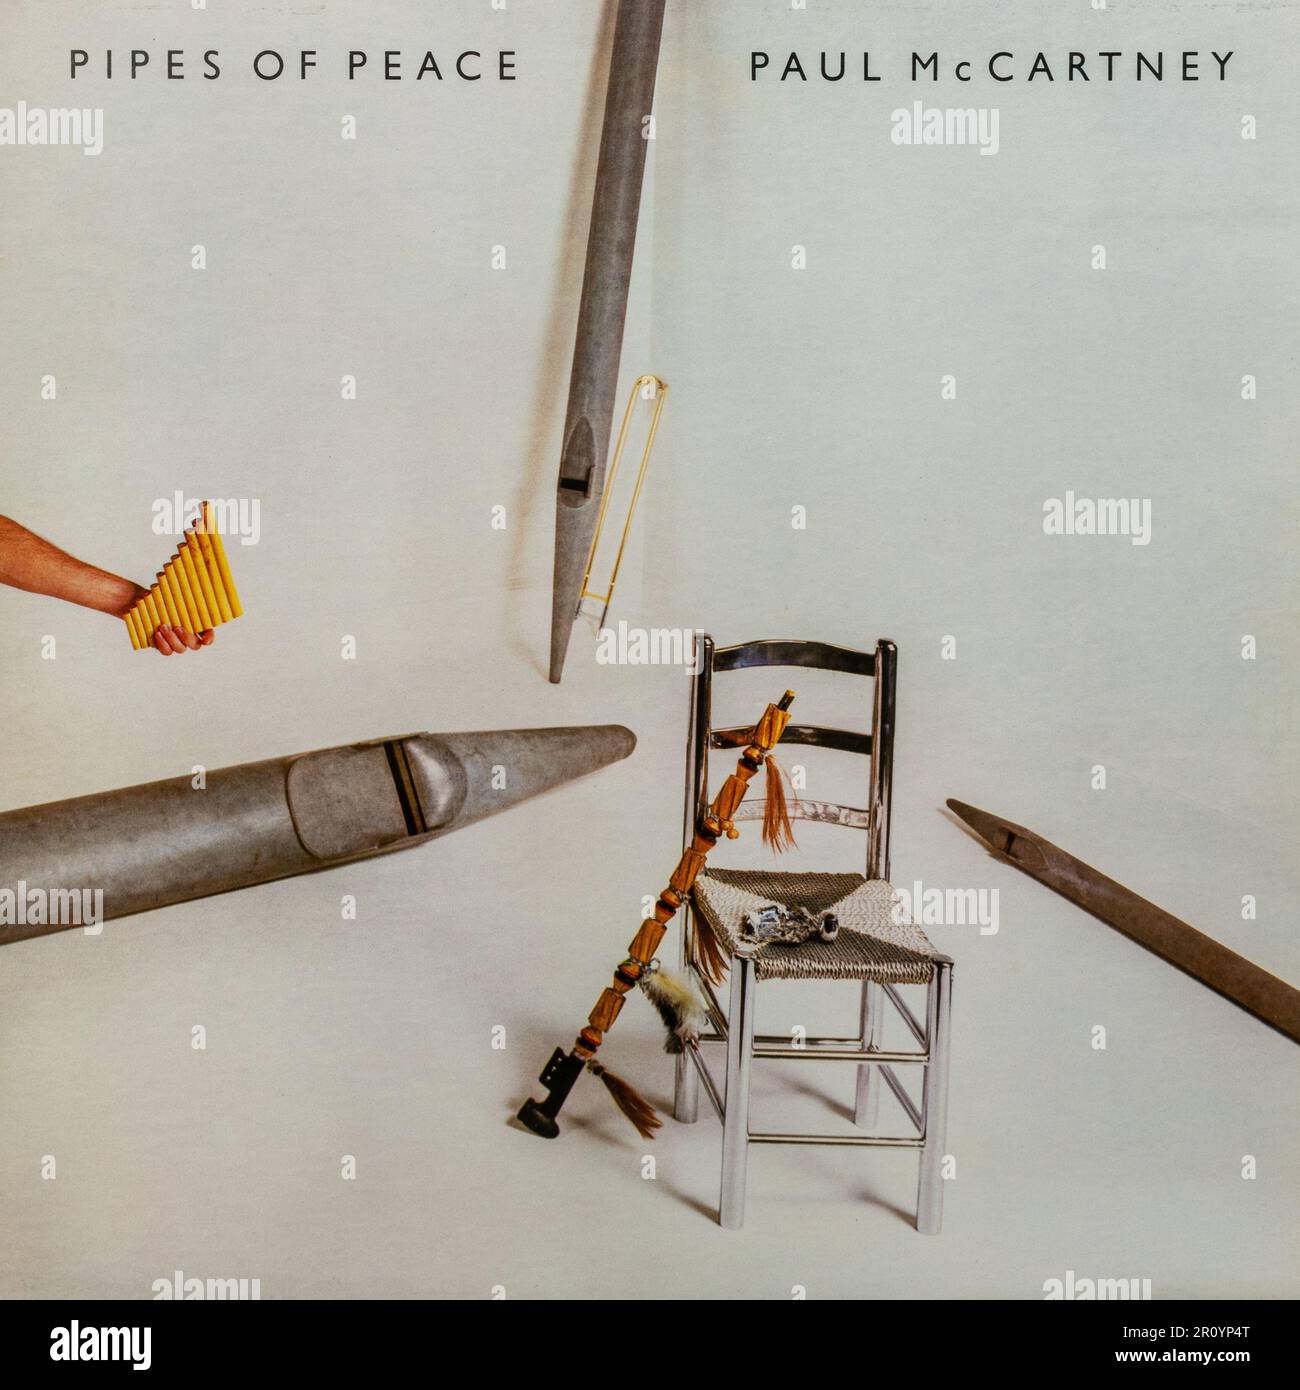 Pipes of Peace by Paul McCartney, vinyl record album cover, UK Stock Photo